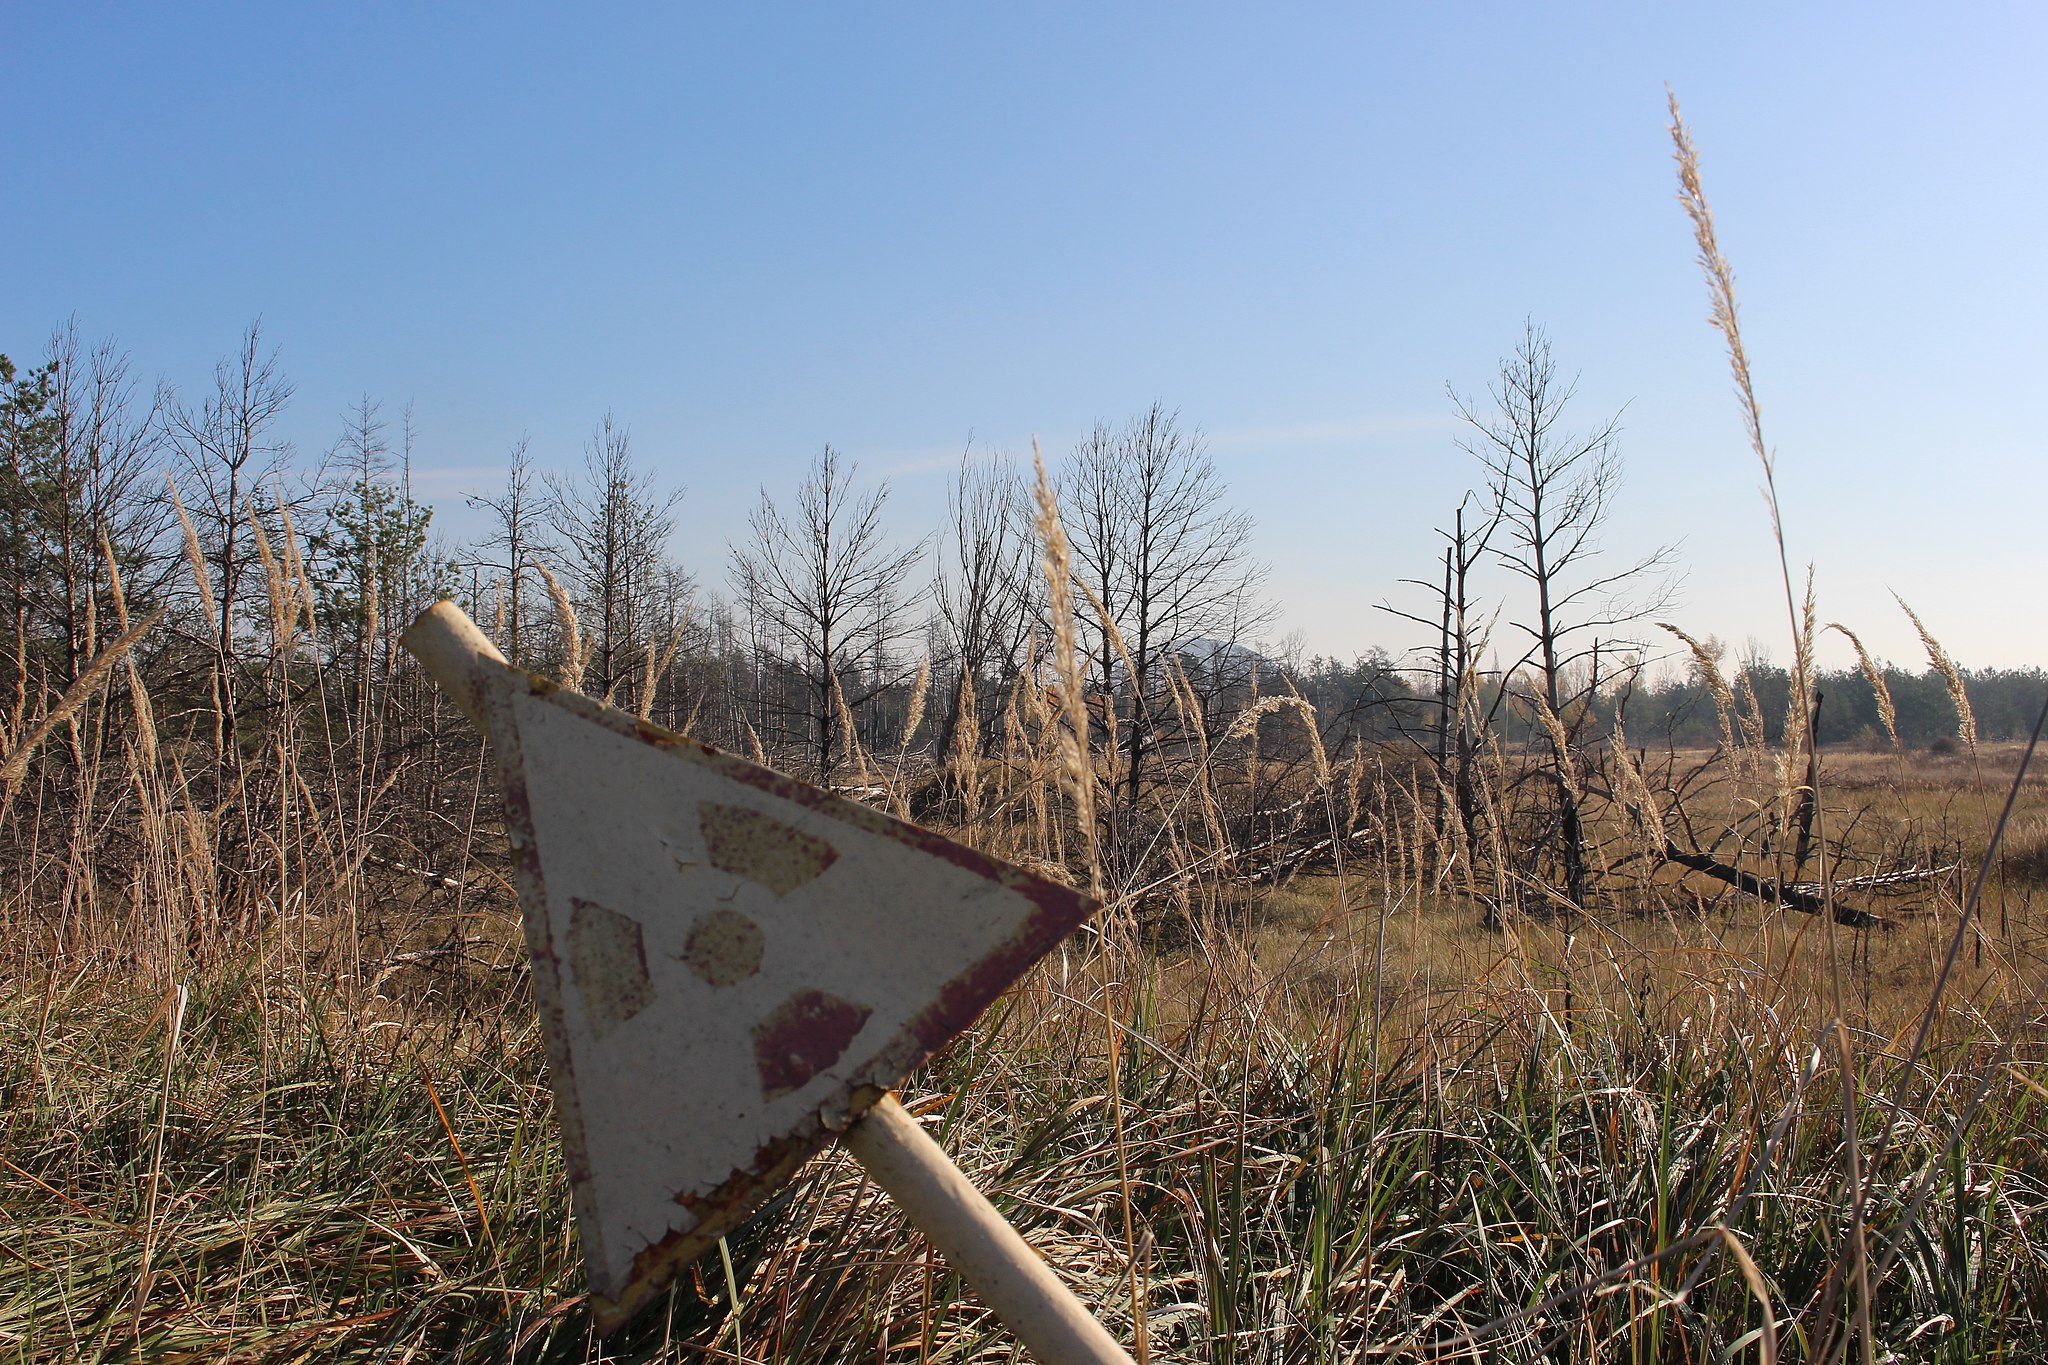 A radiation warning sign in front of a contaminated field near Chernobyl.